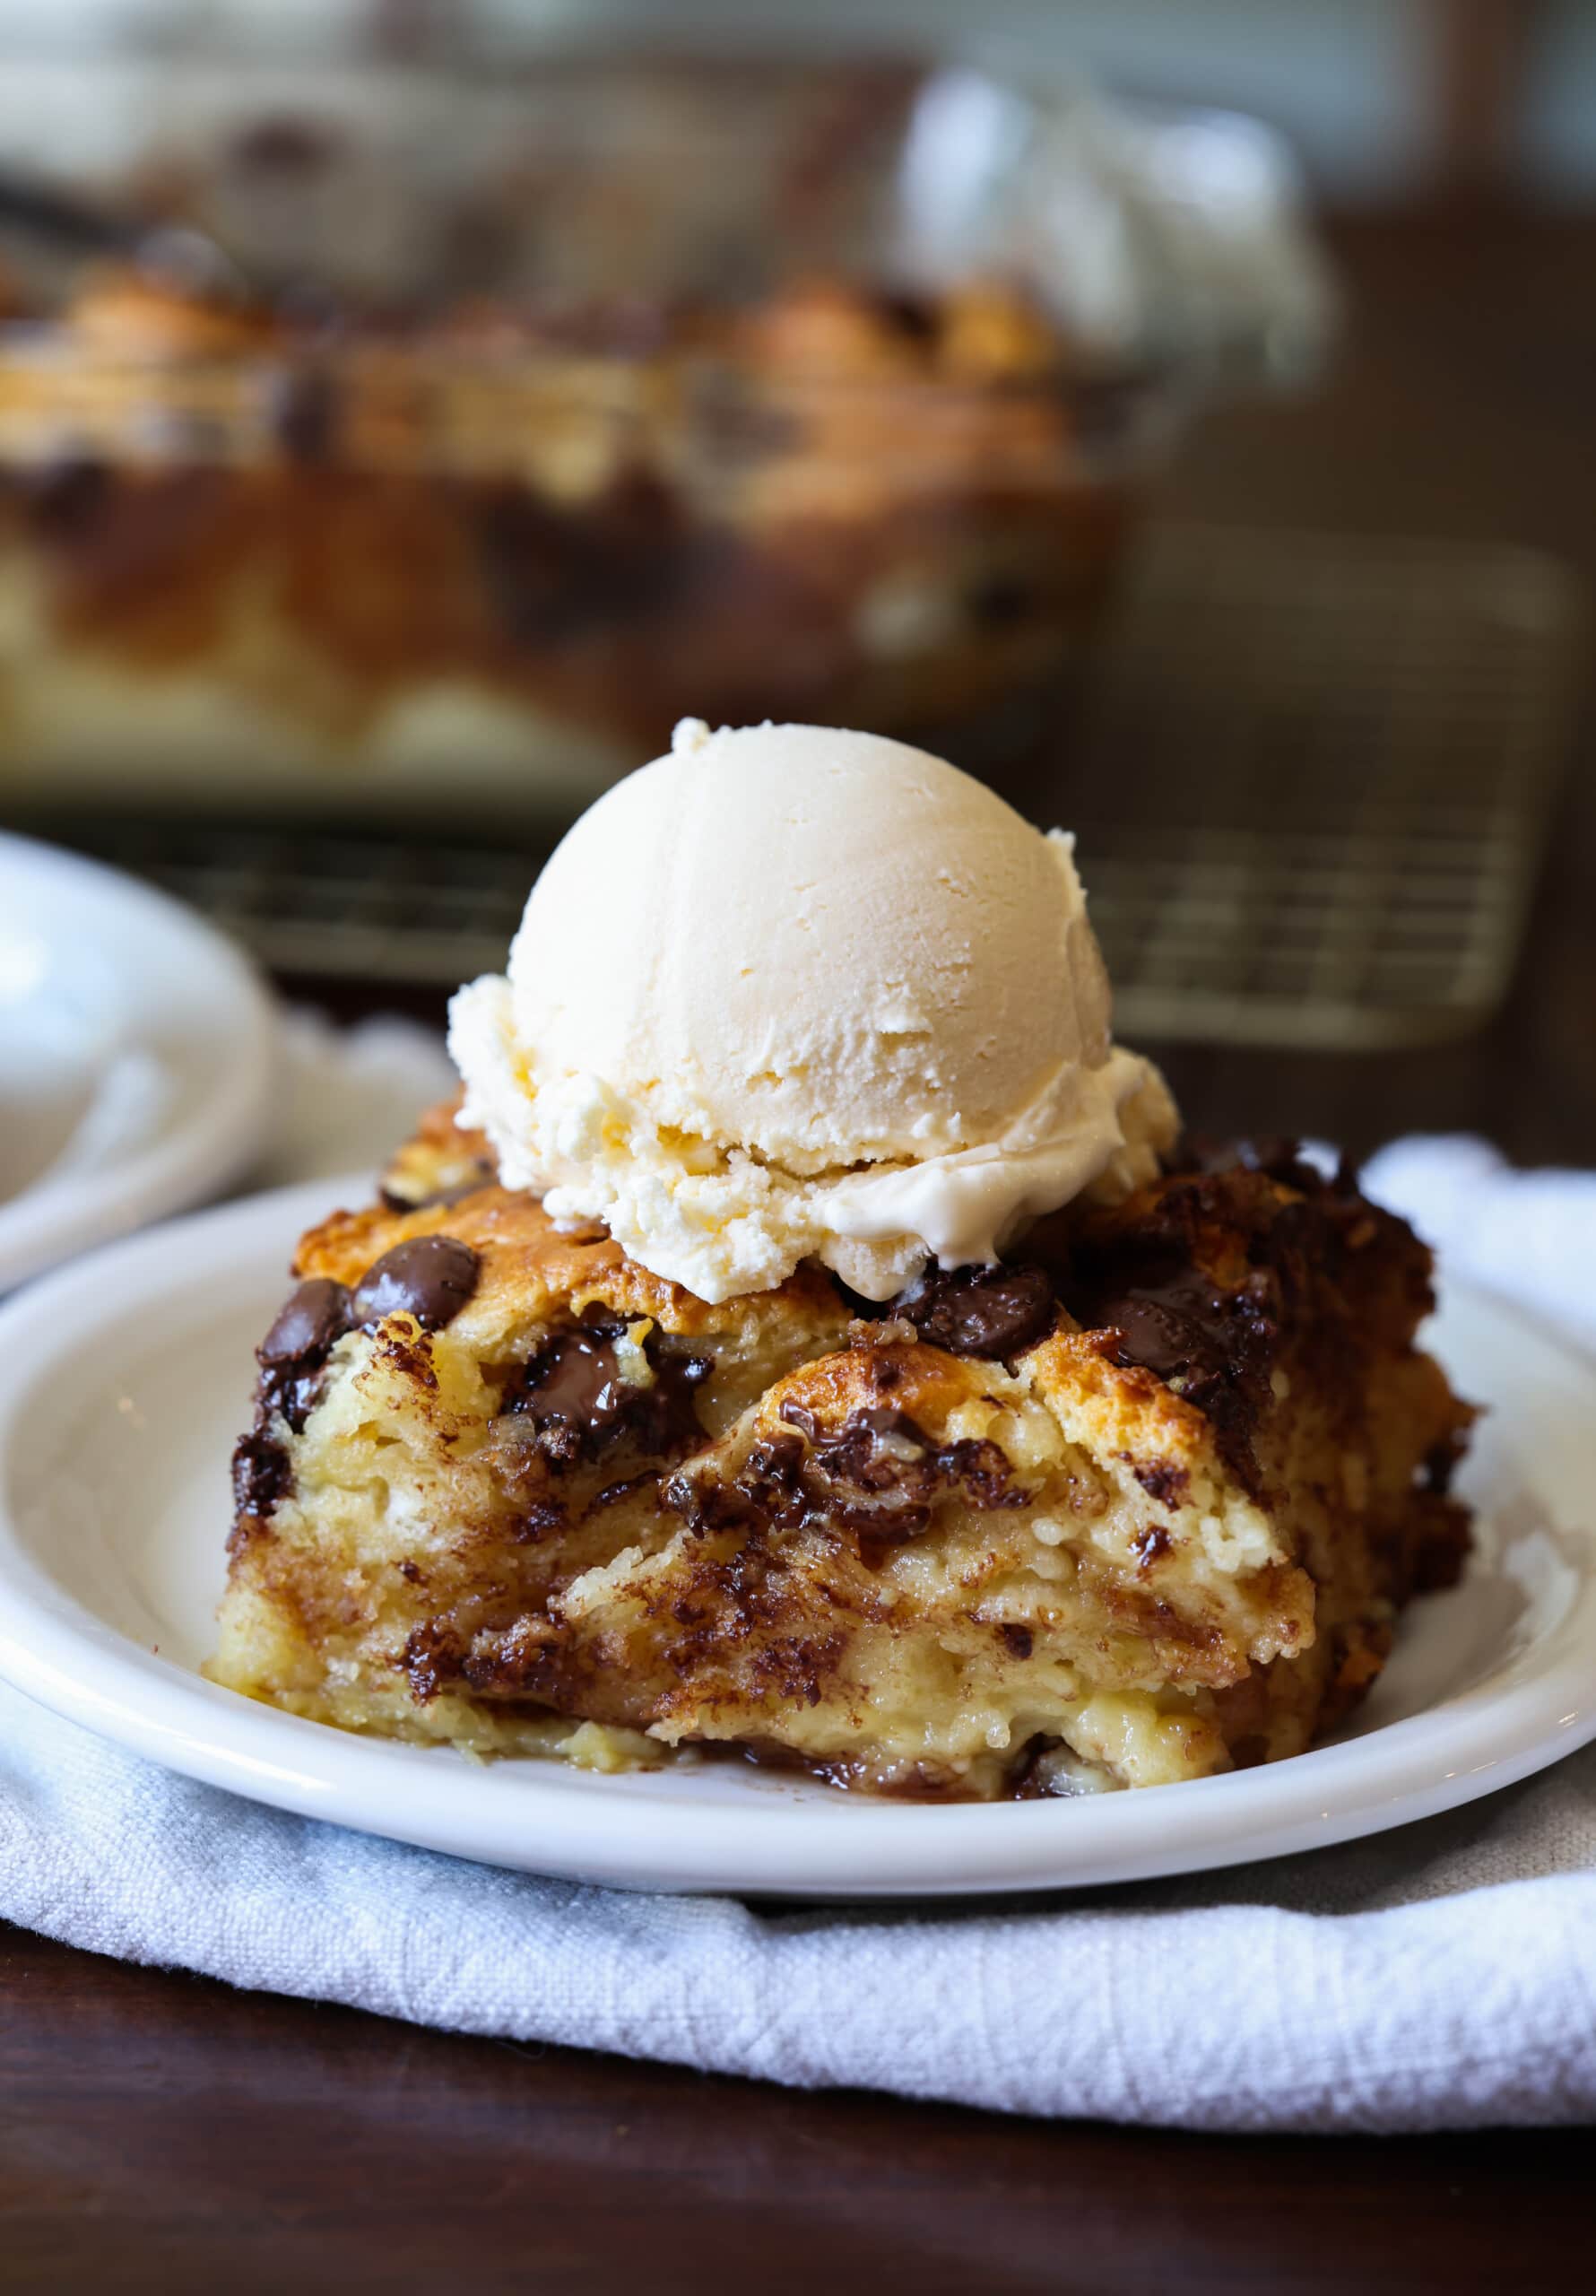 Bread pudding made from day-old biscuits served with vanilla ice cream on a white plate.